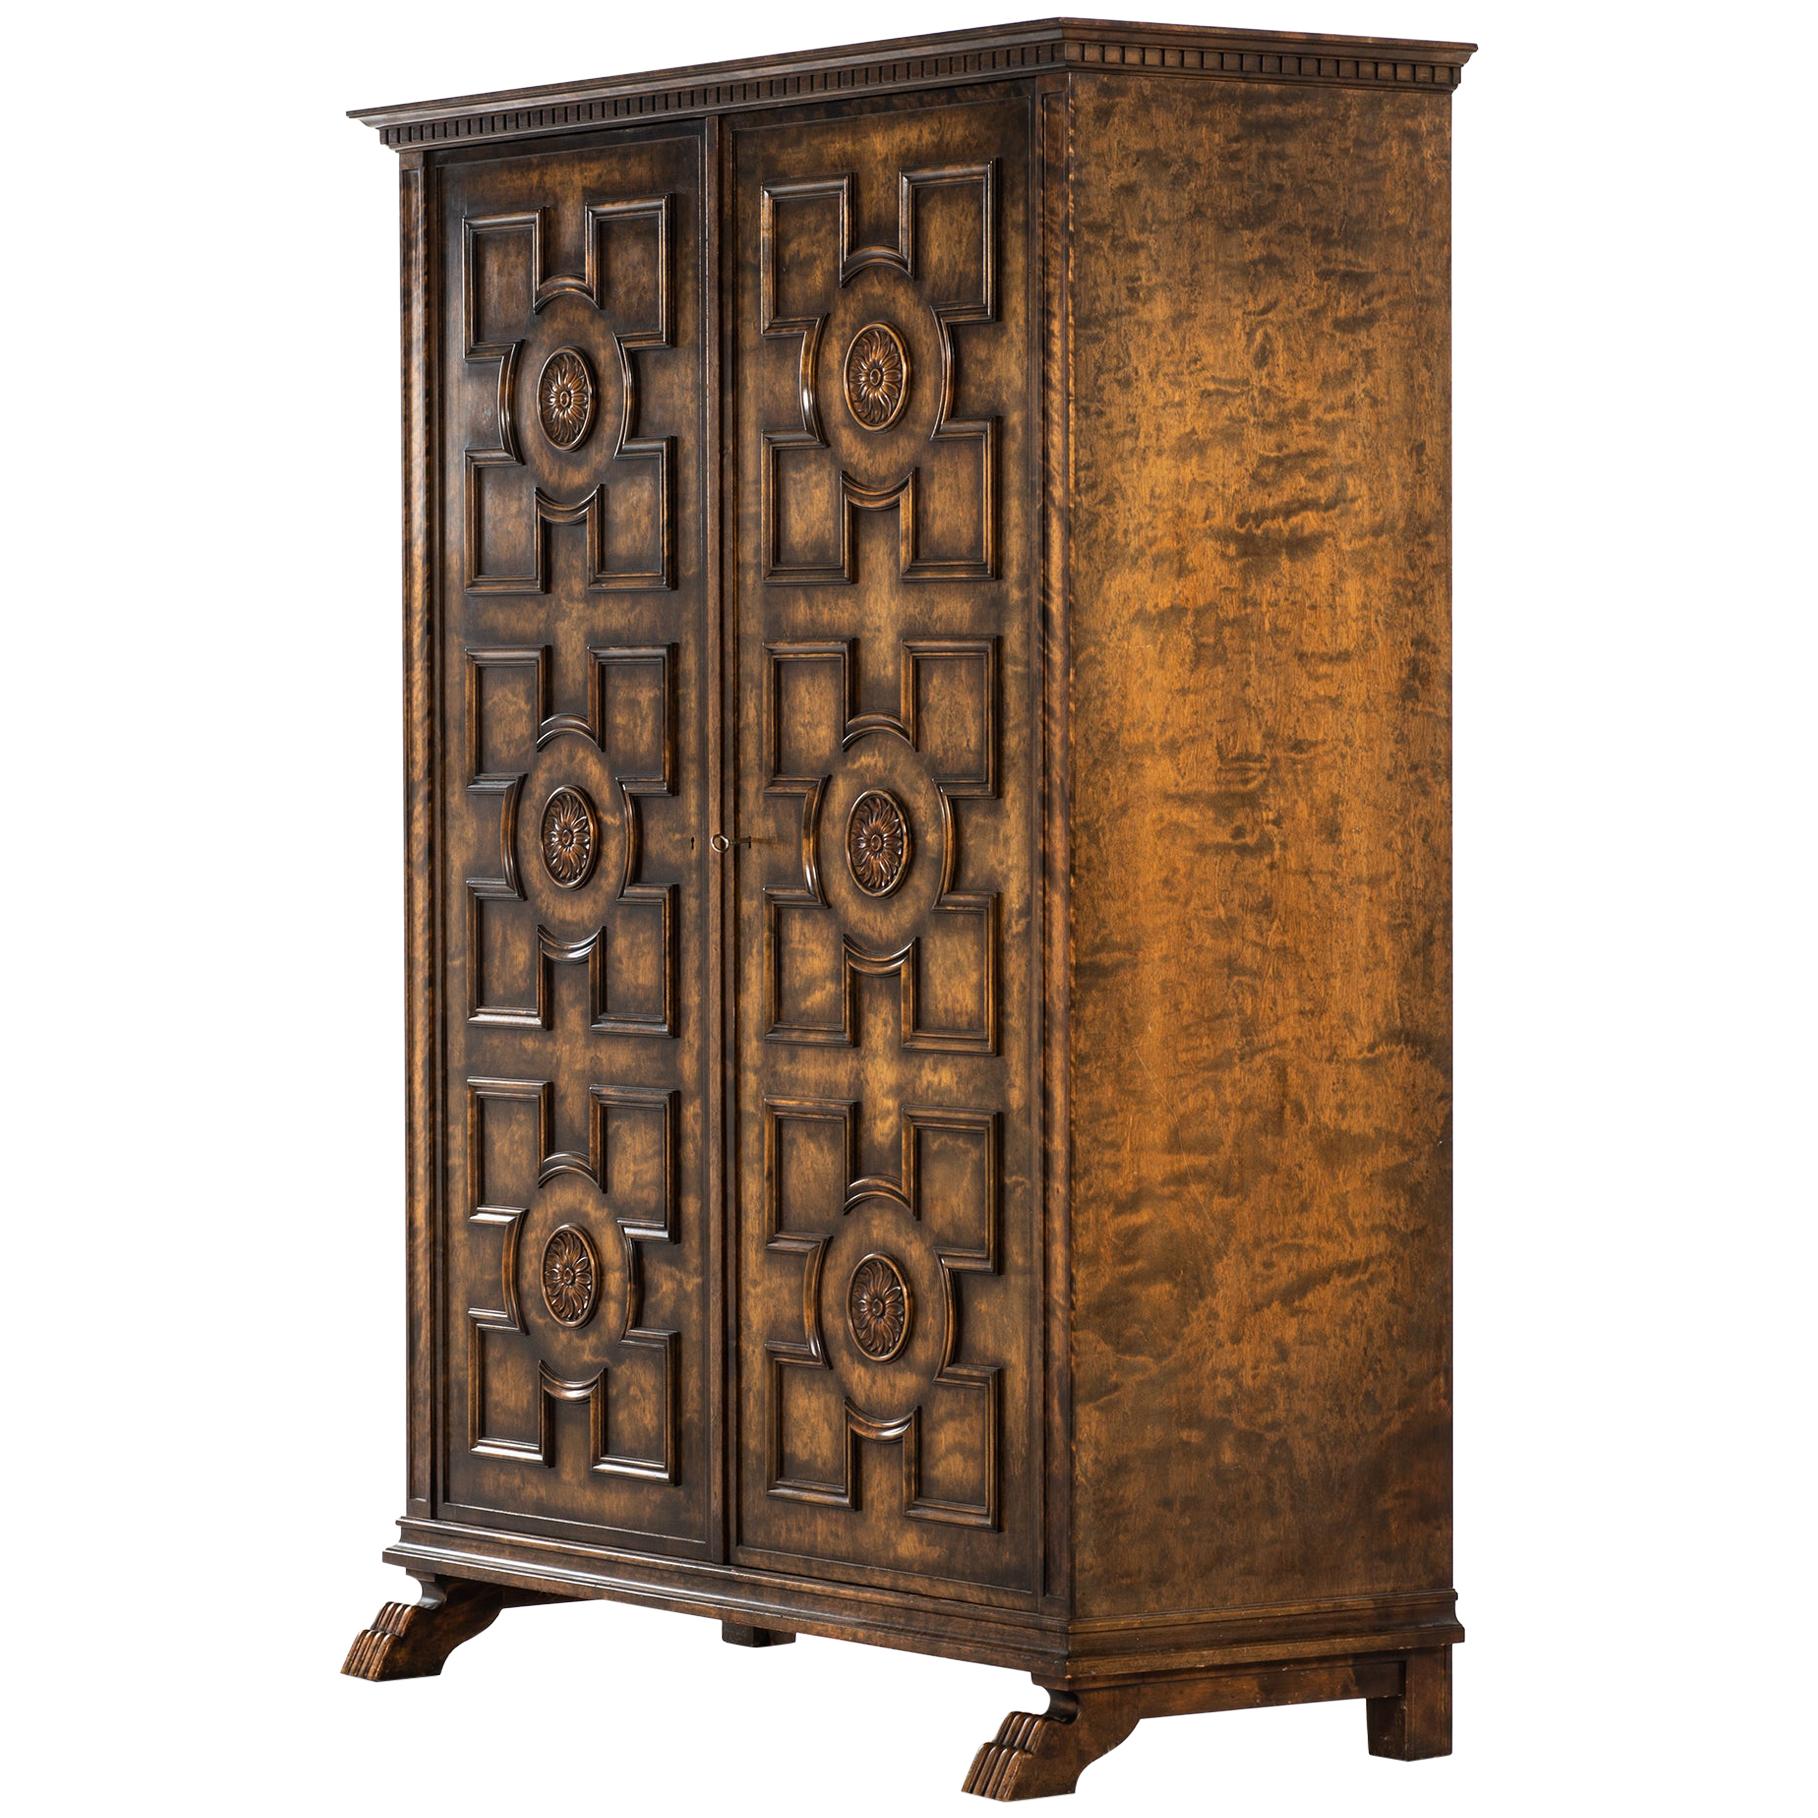 Axel Einar Hjorth Cabinet Model Roma Produced by Bodafors in Sweden